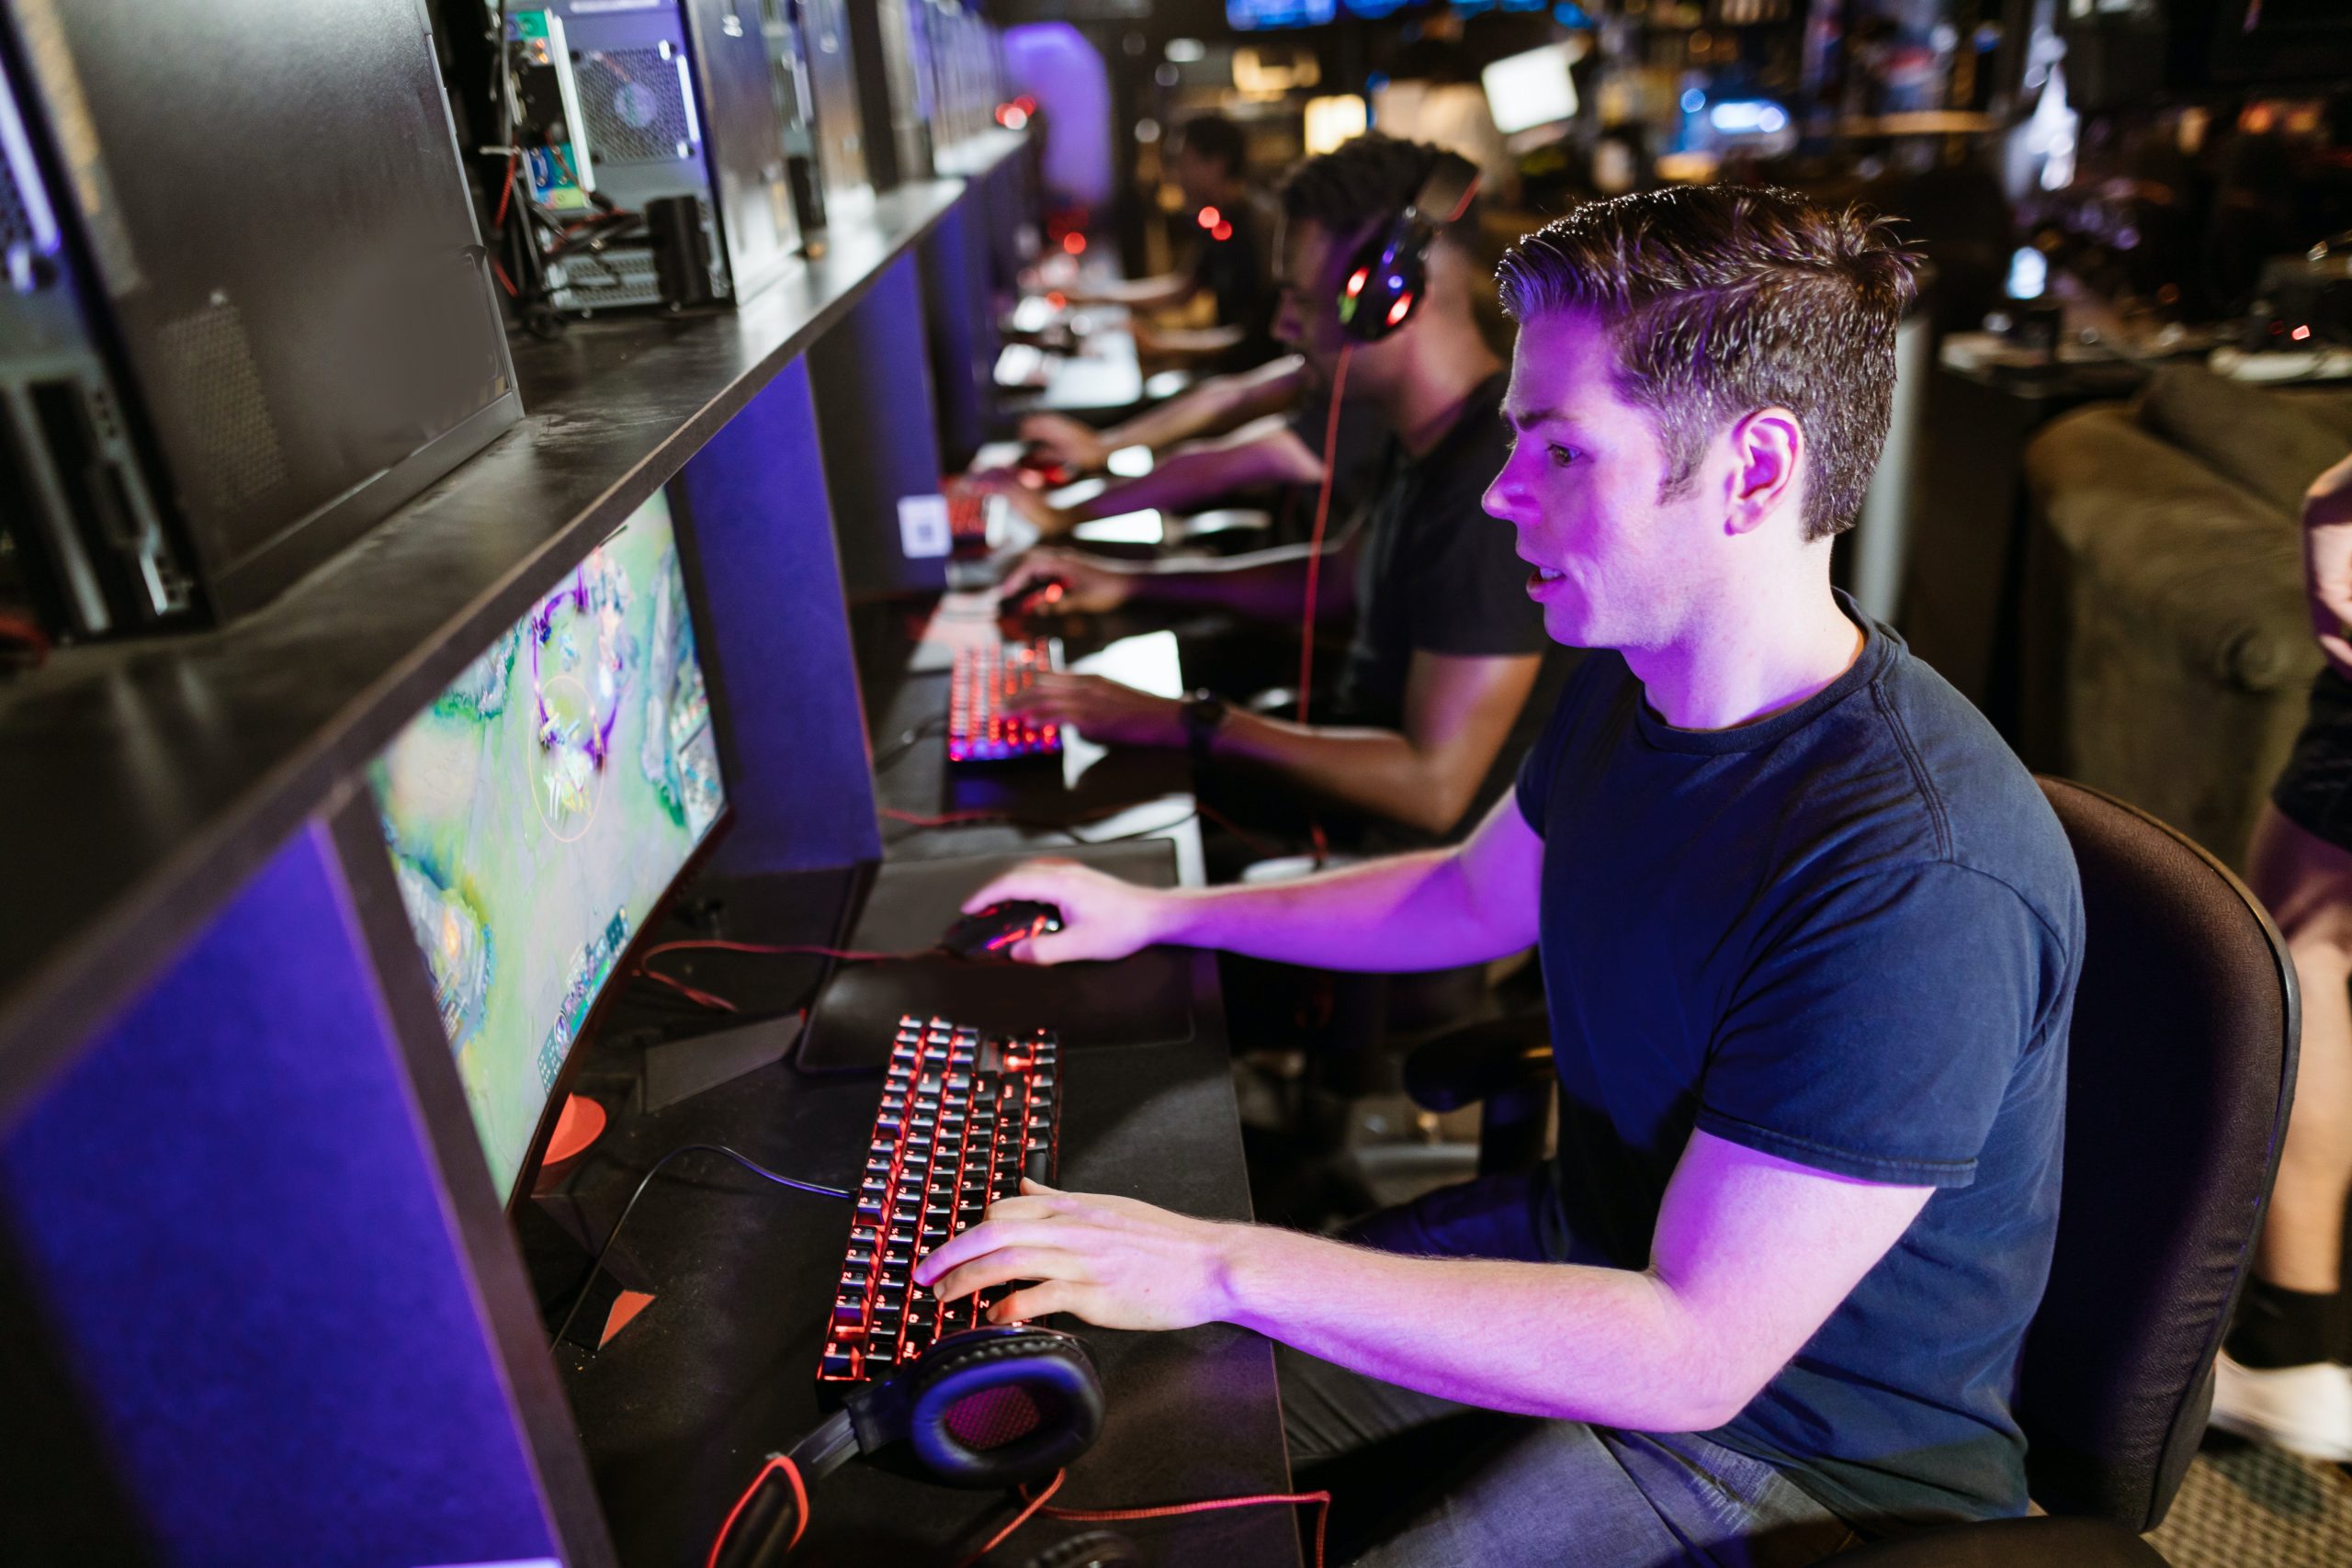 Focused individuals at a gaming center intensely playing video games on high-performance PCs. 